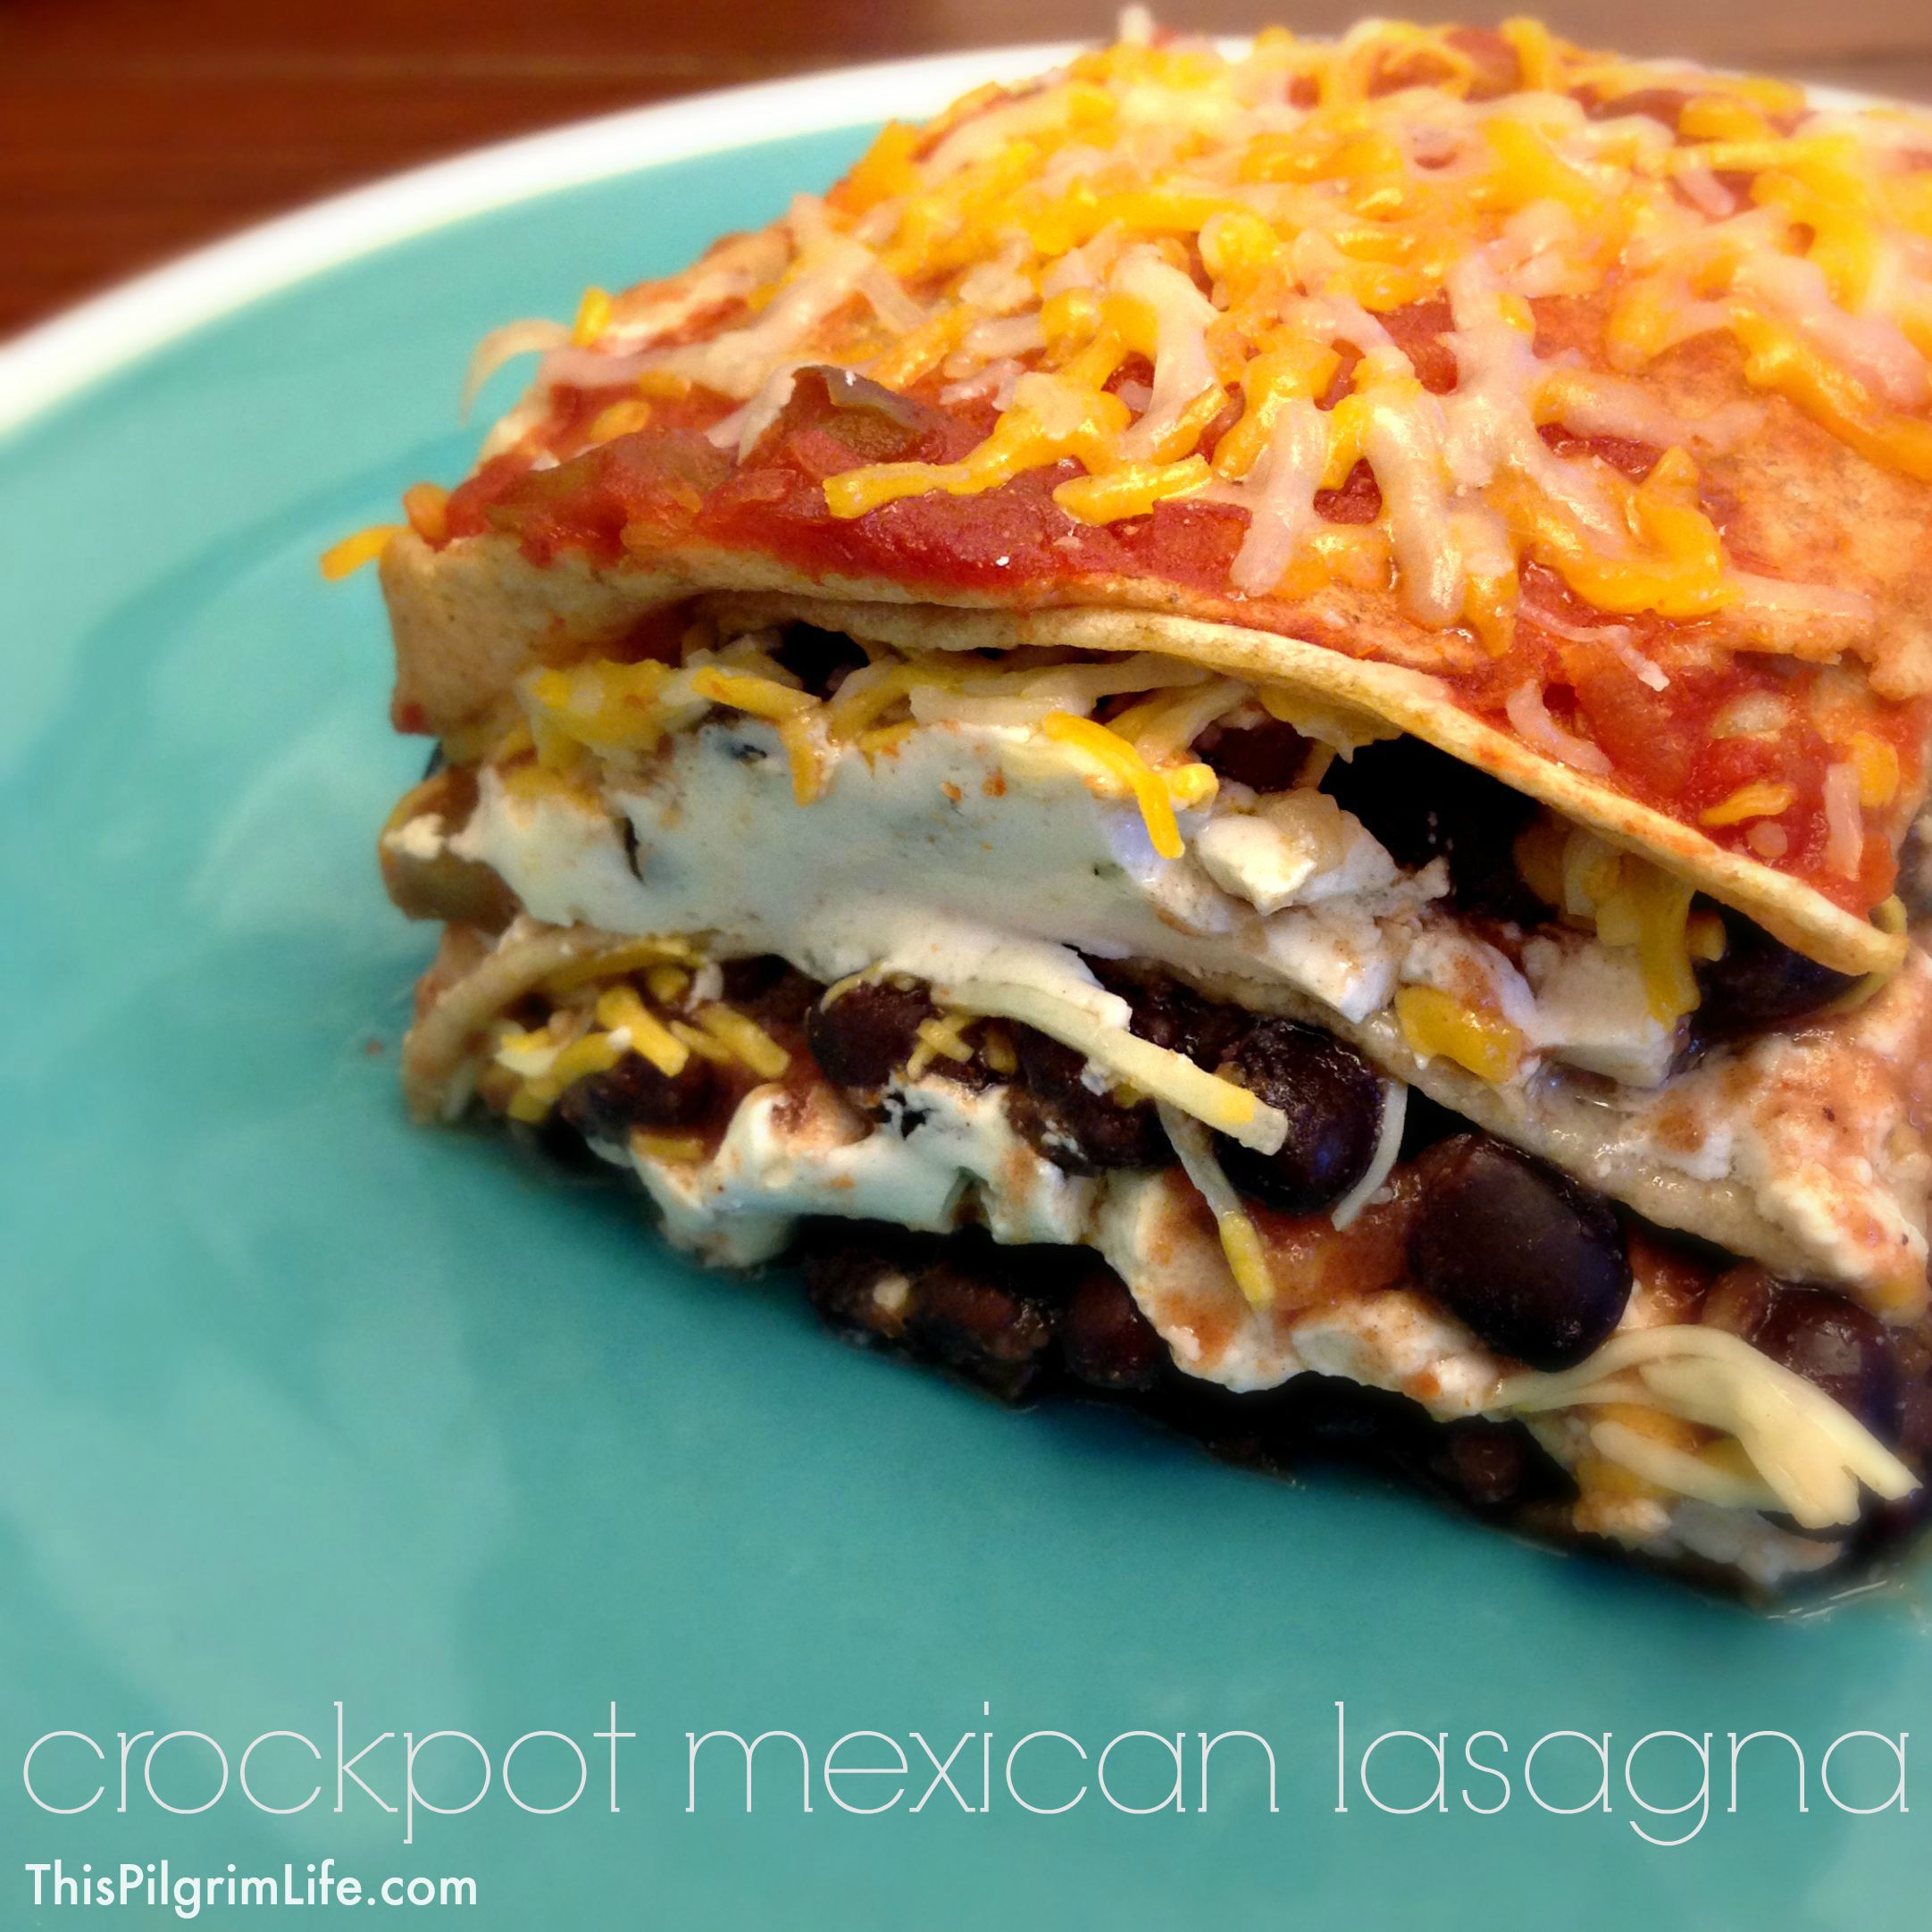 Such a simple and delicious recipe for Mexican lasagna made in the crockpot. Perfect for potlucks and sharing with friends!